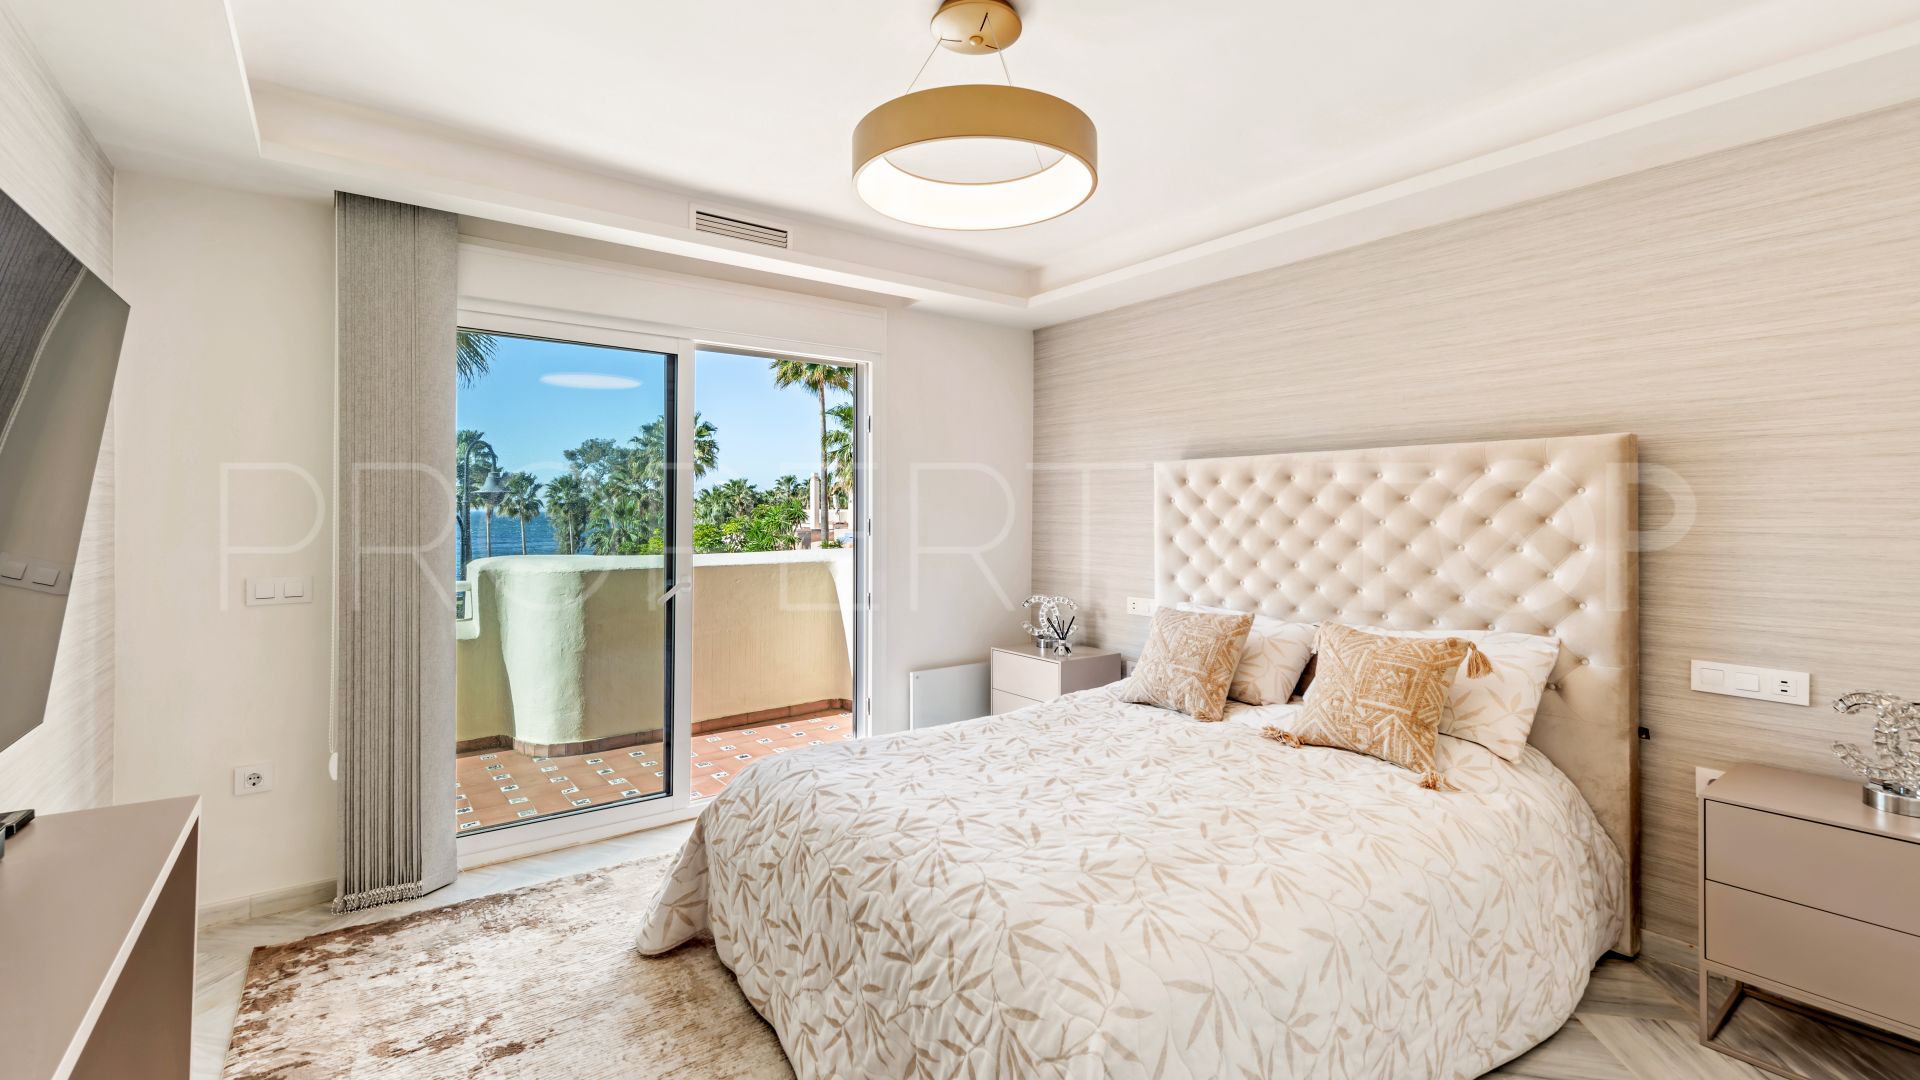 For sale town house in Beach Side New Golden Mile with 3 bedrooms